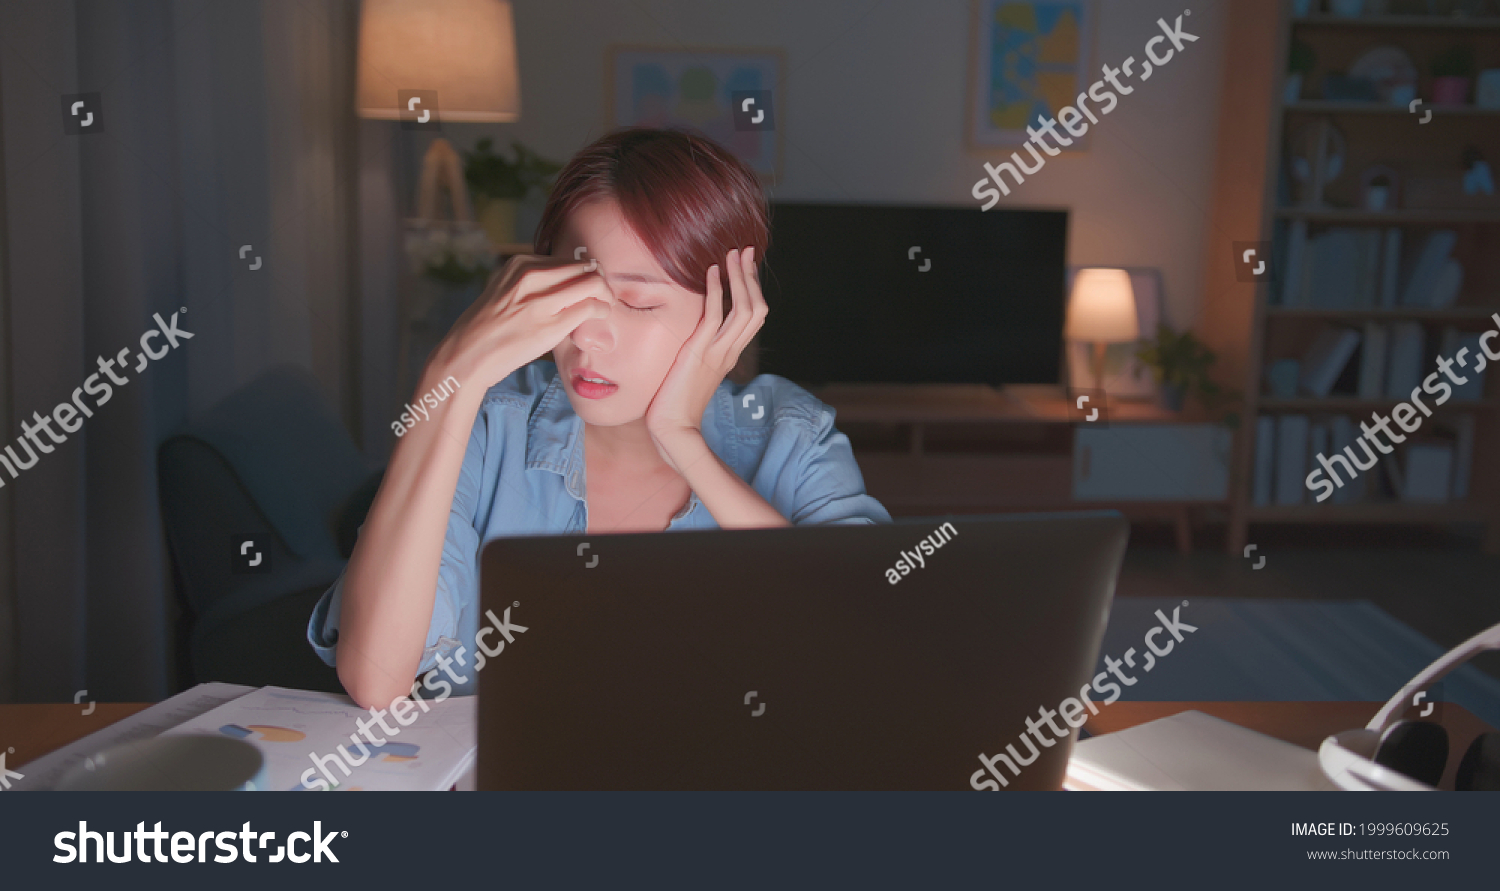 Tired young freelance worker rubbing her eyes while sitting in front of laptop computer and working on promising project - asian girl soho lady stay up late in home office eye painful #1999609625